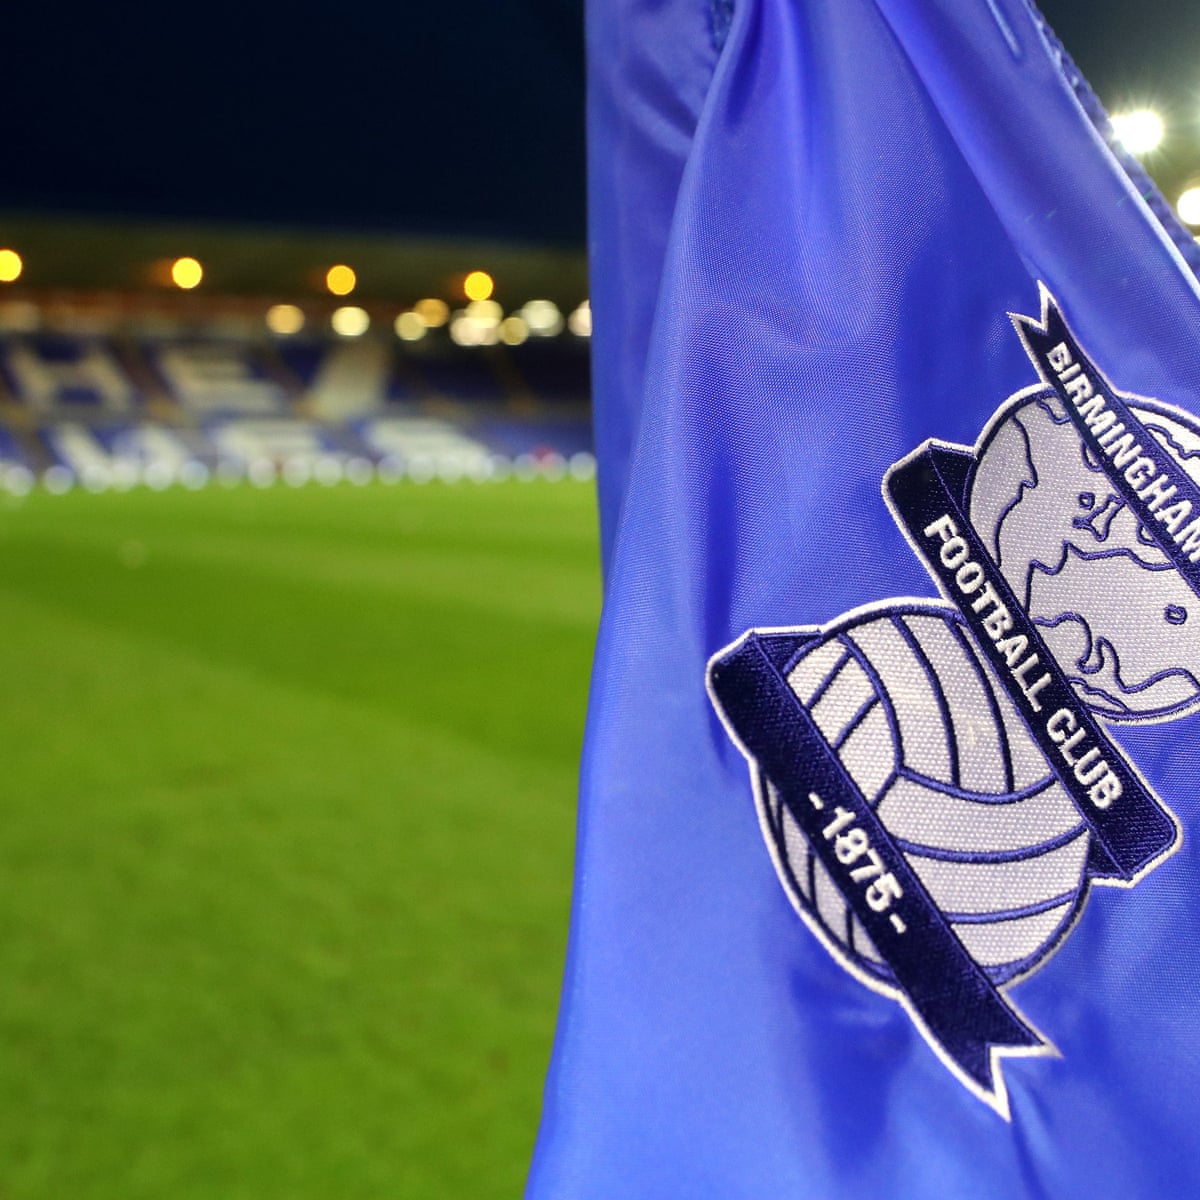 Birmingham City deducted nine points by EFL for financial breaches